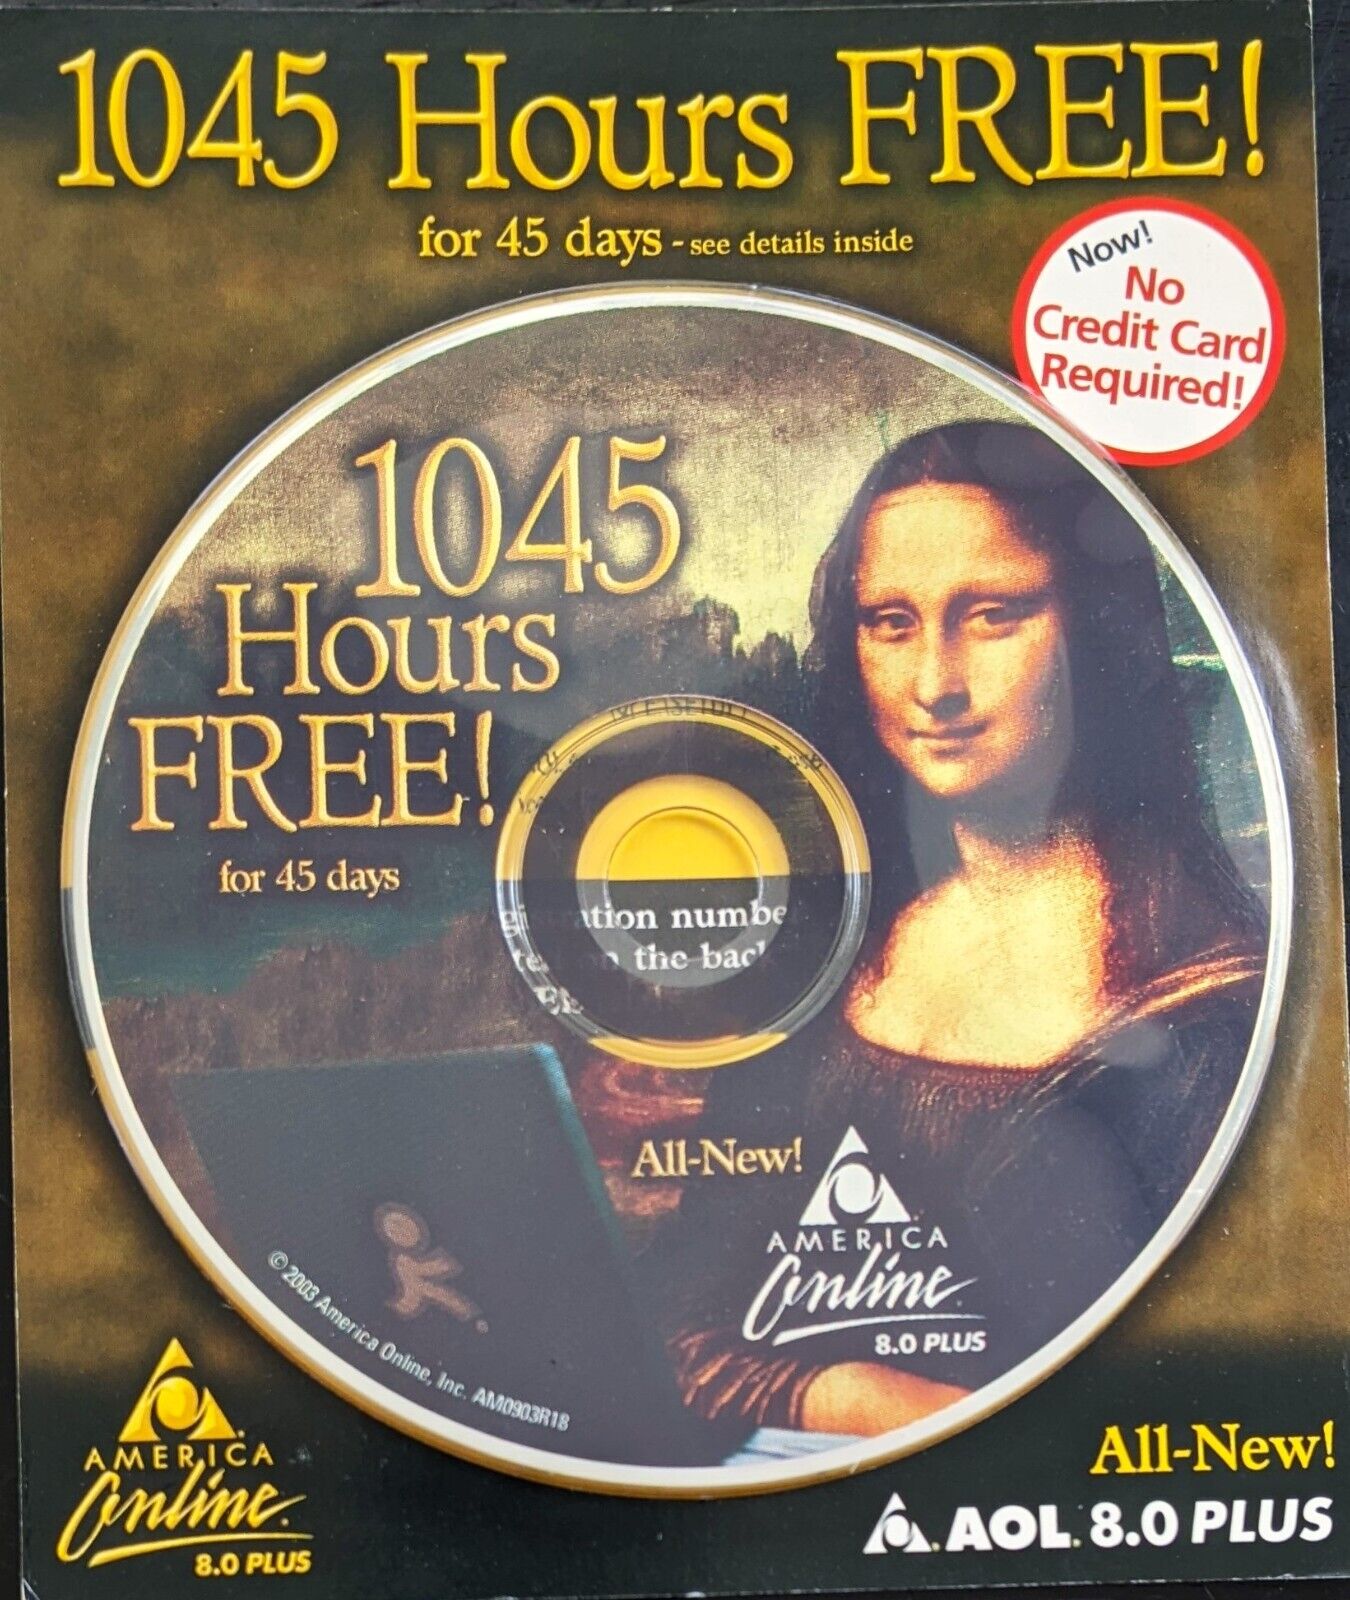 MONA LISA America Online Collectible / Install Disc, AOL CD, Vintage V8.0 Plus